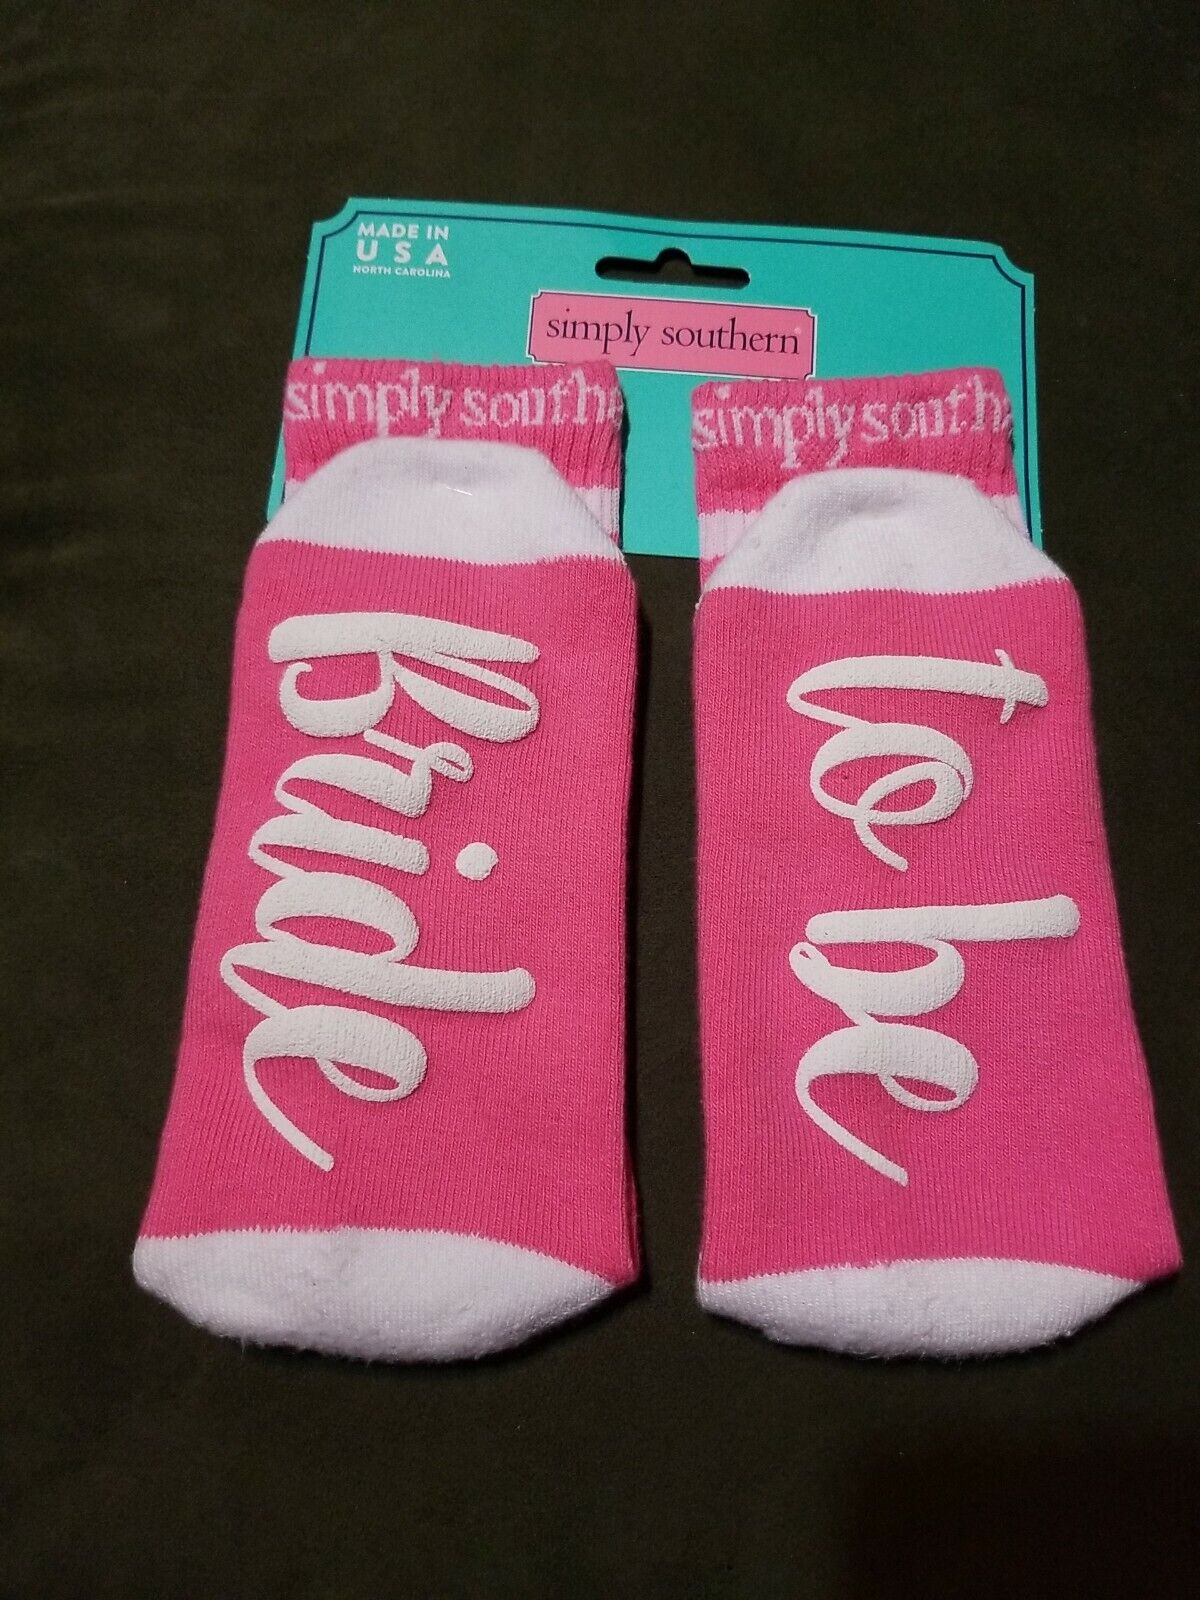 New Simply Southern Bride To Be Socks Wedding Skid Resistant Unisex Slipper Pink